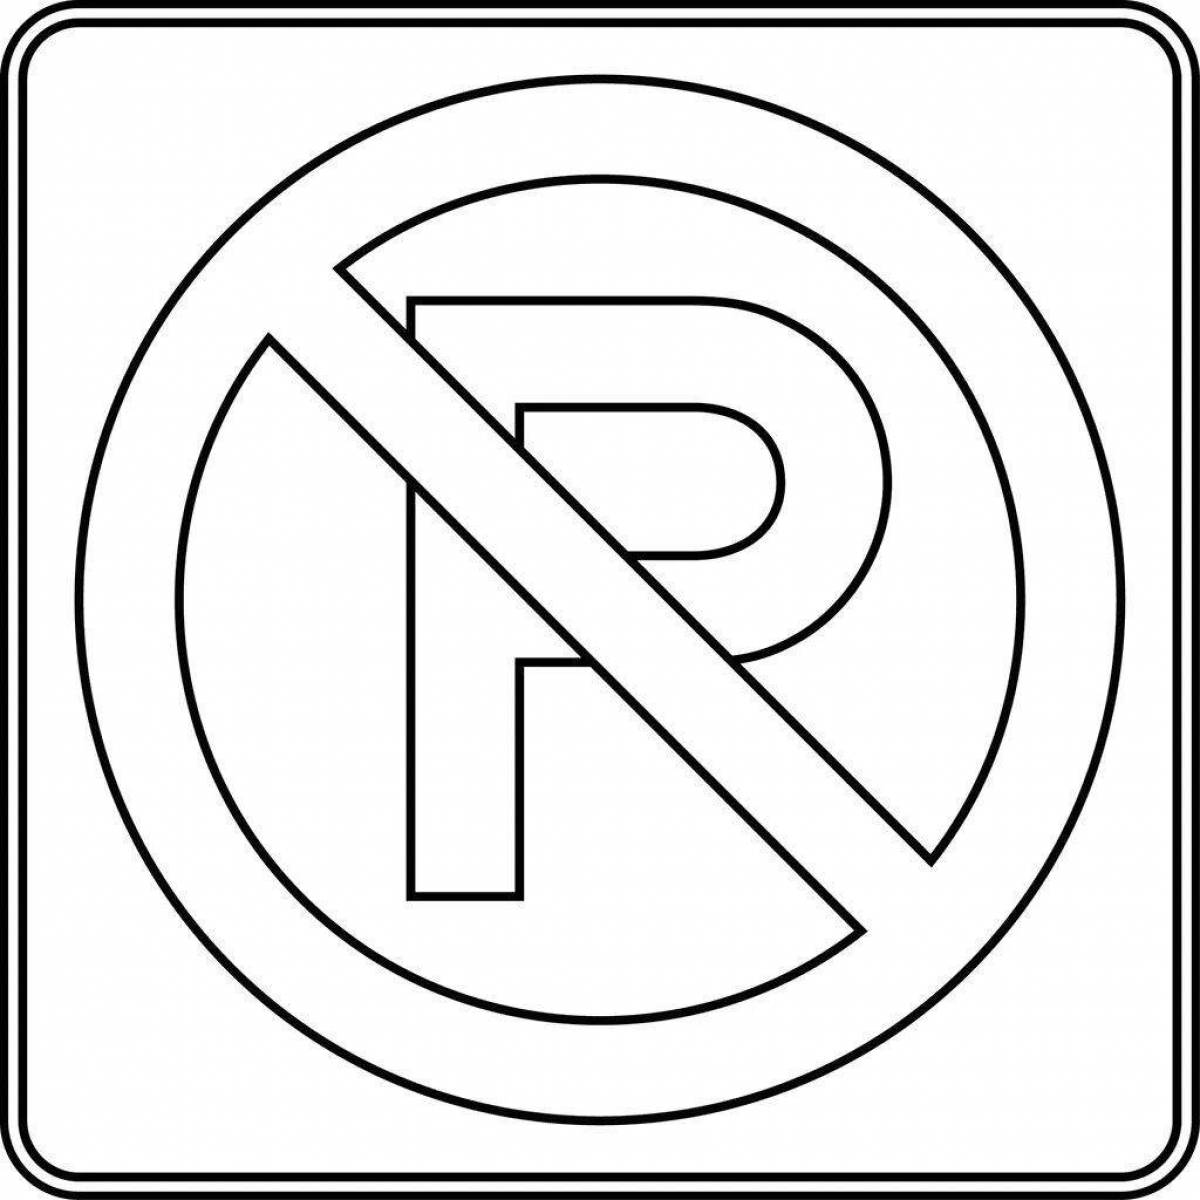 Coloring page bizarre prohibition road sign